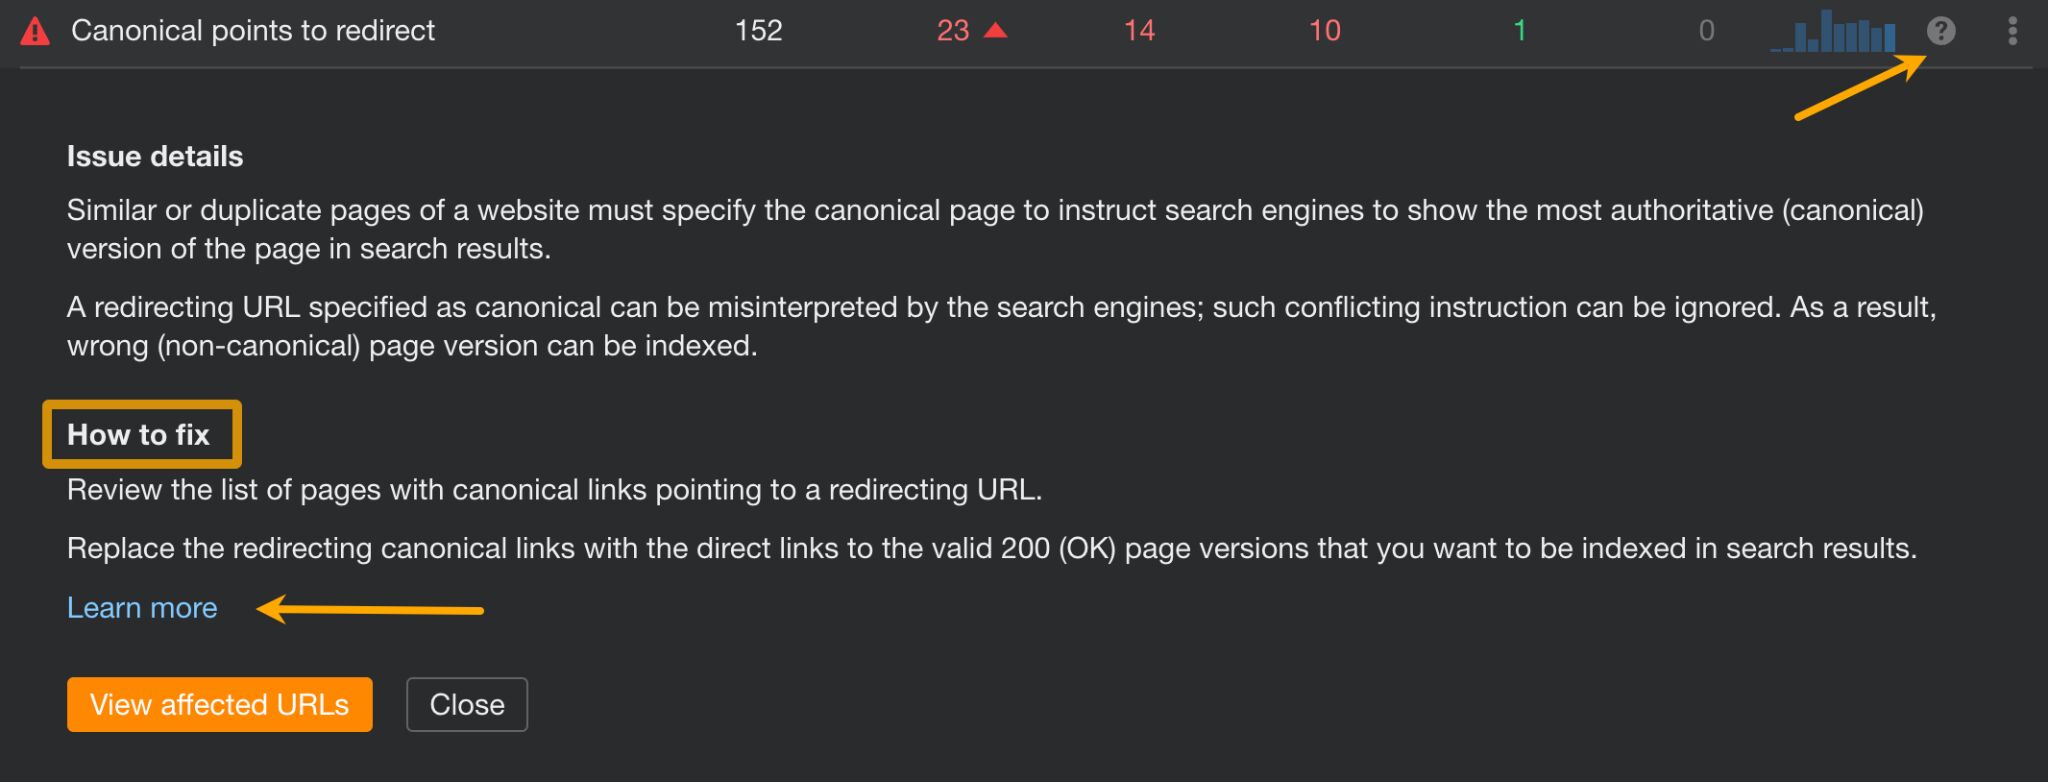 Canonical points to redirect issue details.